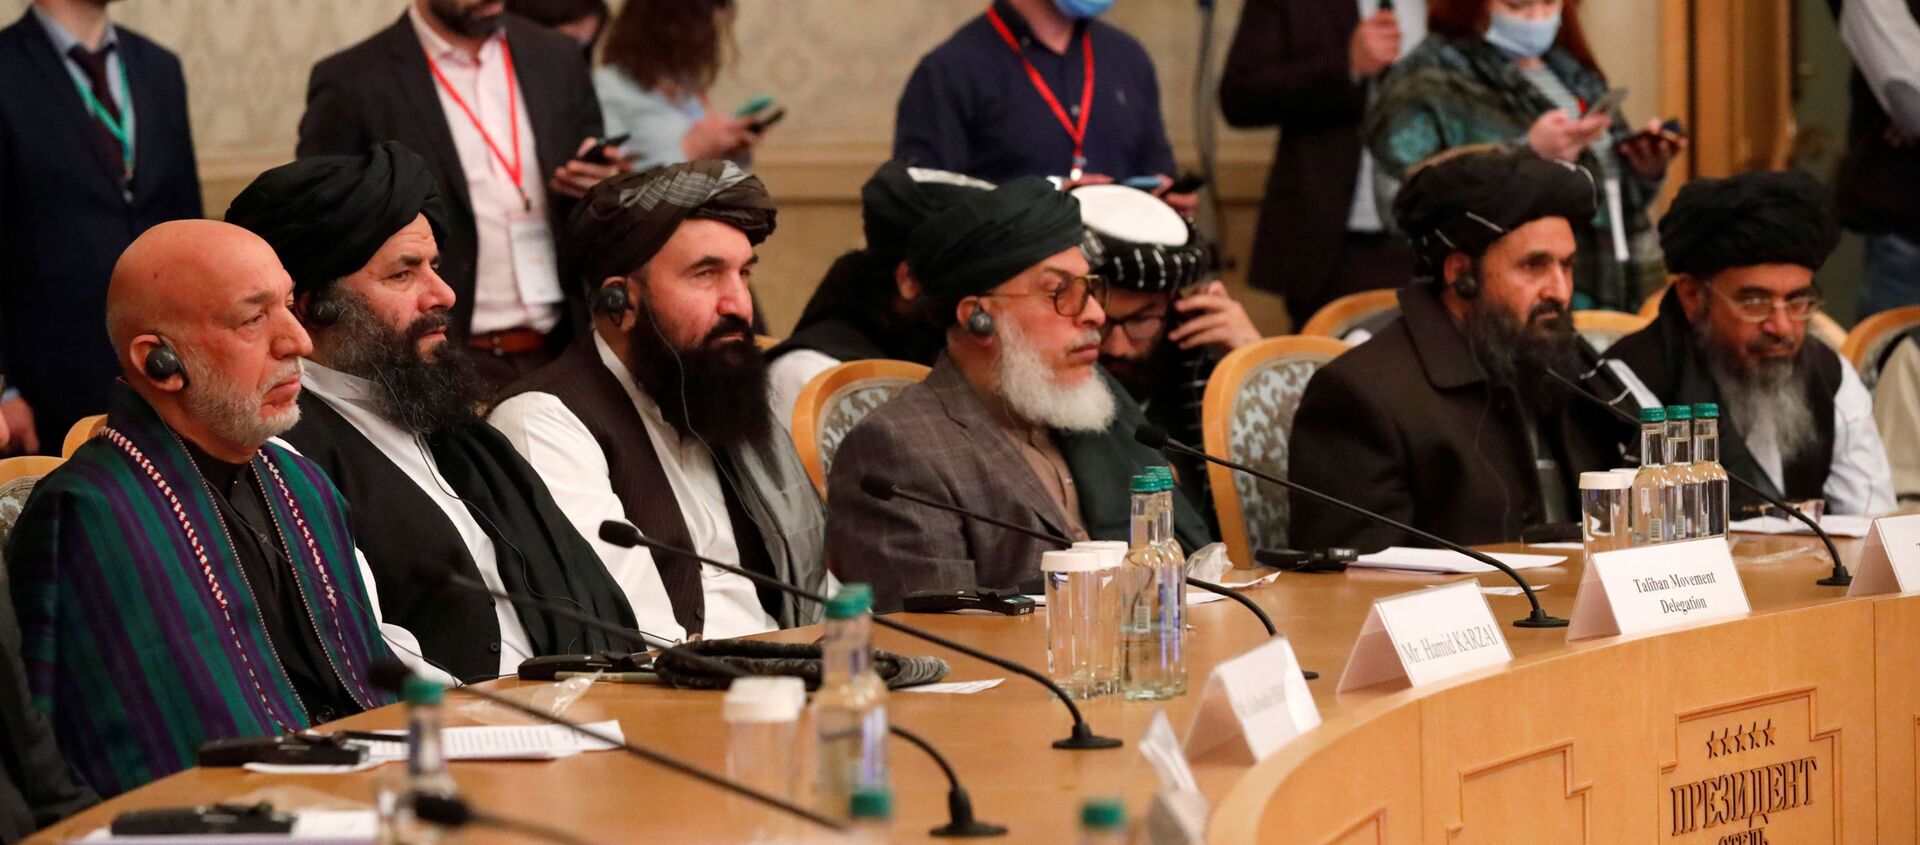 Officials, including Afghan former President Hamid Karzai and the Taliban's deputy leader and negotiator Mullah Abdul Ghani Baradar, attend the Afghan peace conference in Moscow, Russia March 18, 2021. Alexander Zemlianichenko/Pool via REUTERS - Sputnik International, 1920, 13.04.2021